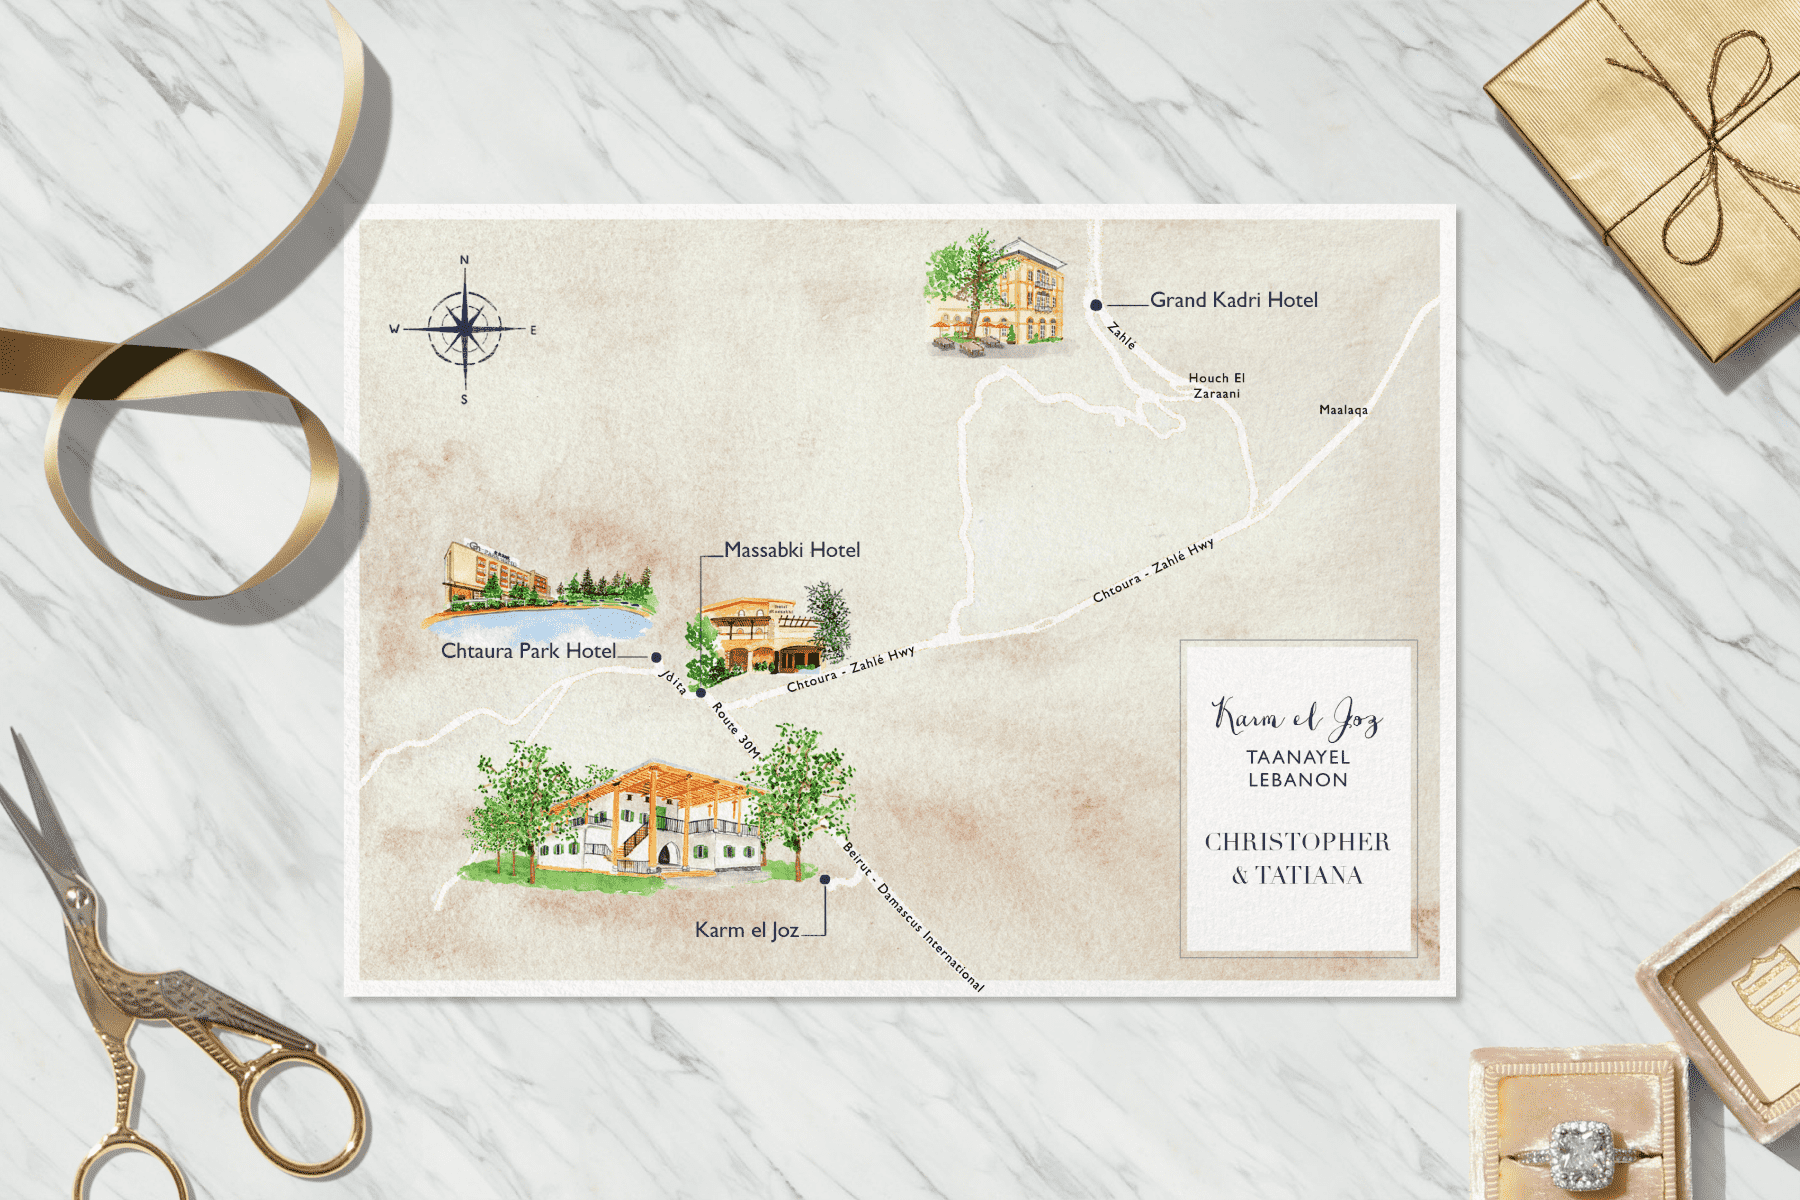 A custom wedding invitation shows a painted map with hotels and roads that are pertinent to the event and guests.